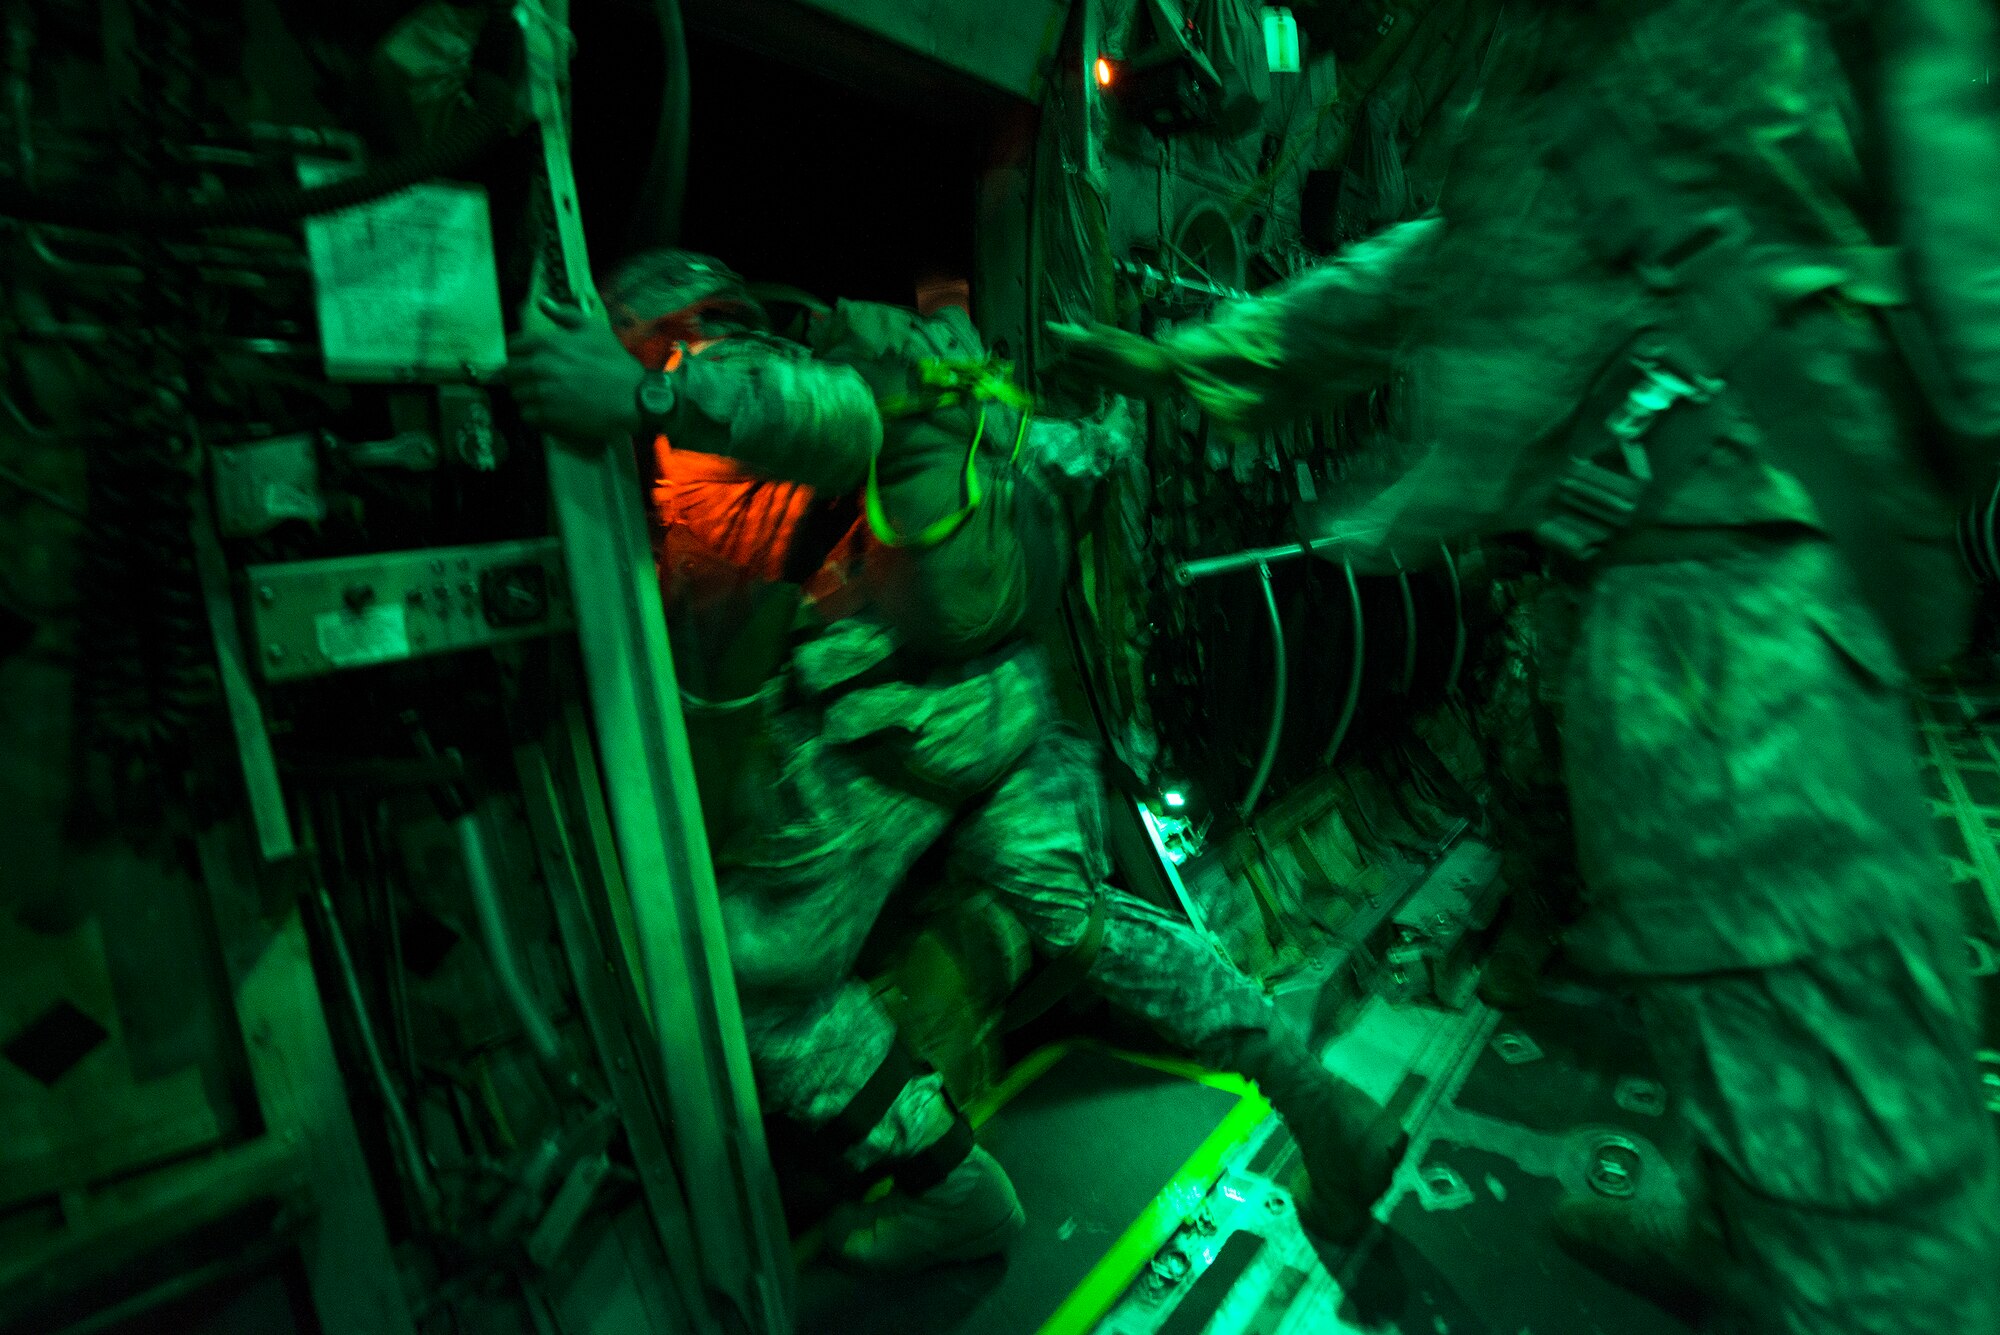 A U.S. Army paratrooper from the 82nd Airborne Division performs a pre-jump check, before exiting a C-130H Aug. 18, 2013, near Alexandria International Airport, La. The jump marked the start operations during Joint Operational Access Exercise 13-0X , part of a multi-day combined military training exercise designed to prepare Airmen and soldiers to respond to worldwide crises and contingencies. (U.S. Air Force photo by Staff Sgt. Russ Scalf)